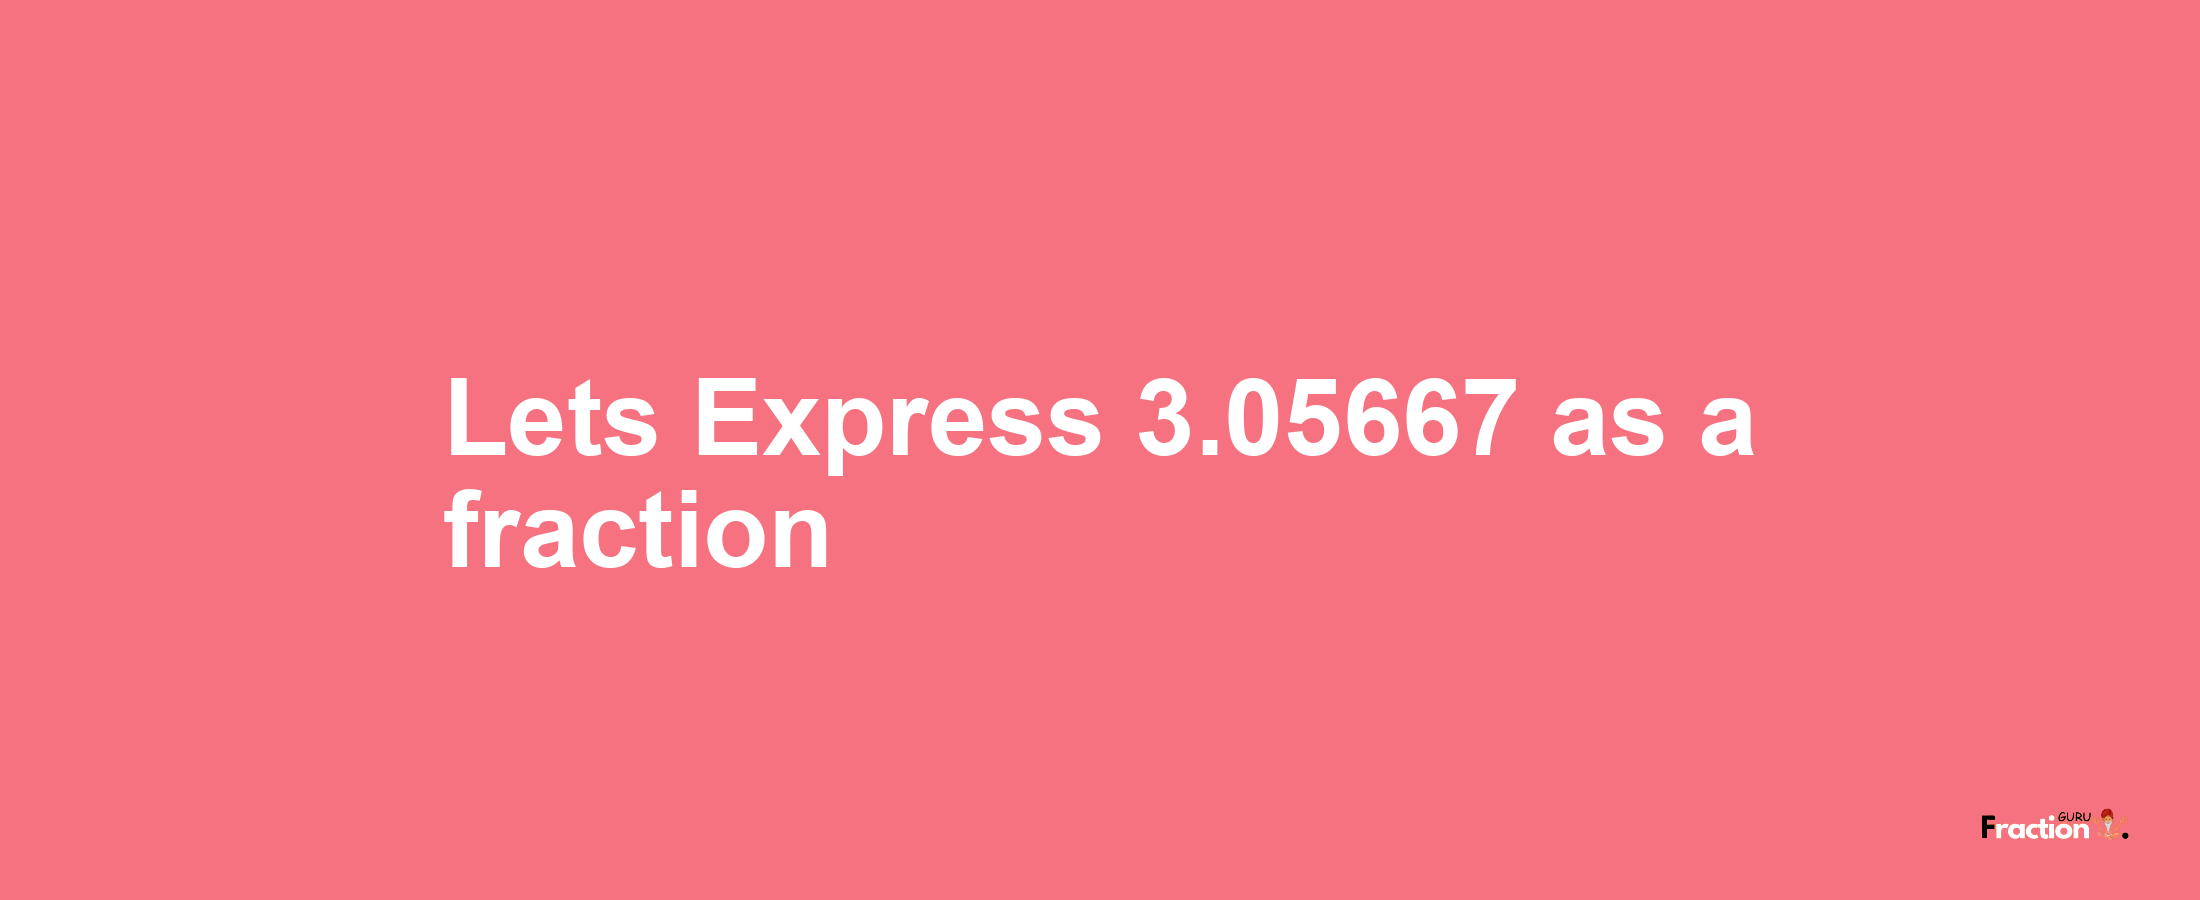 Lets Express 3.05667 as afraction